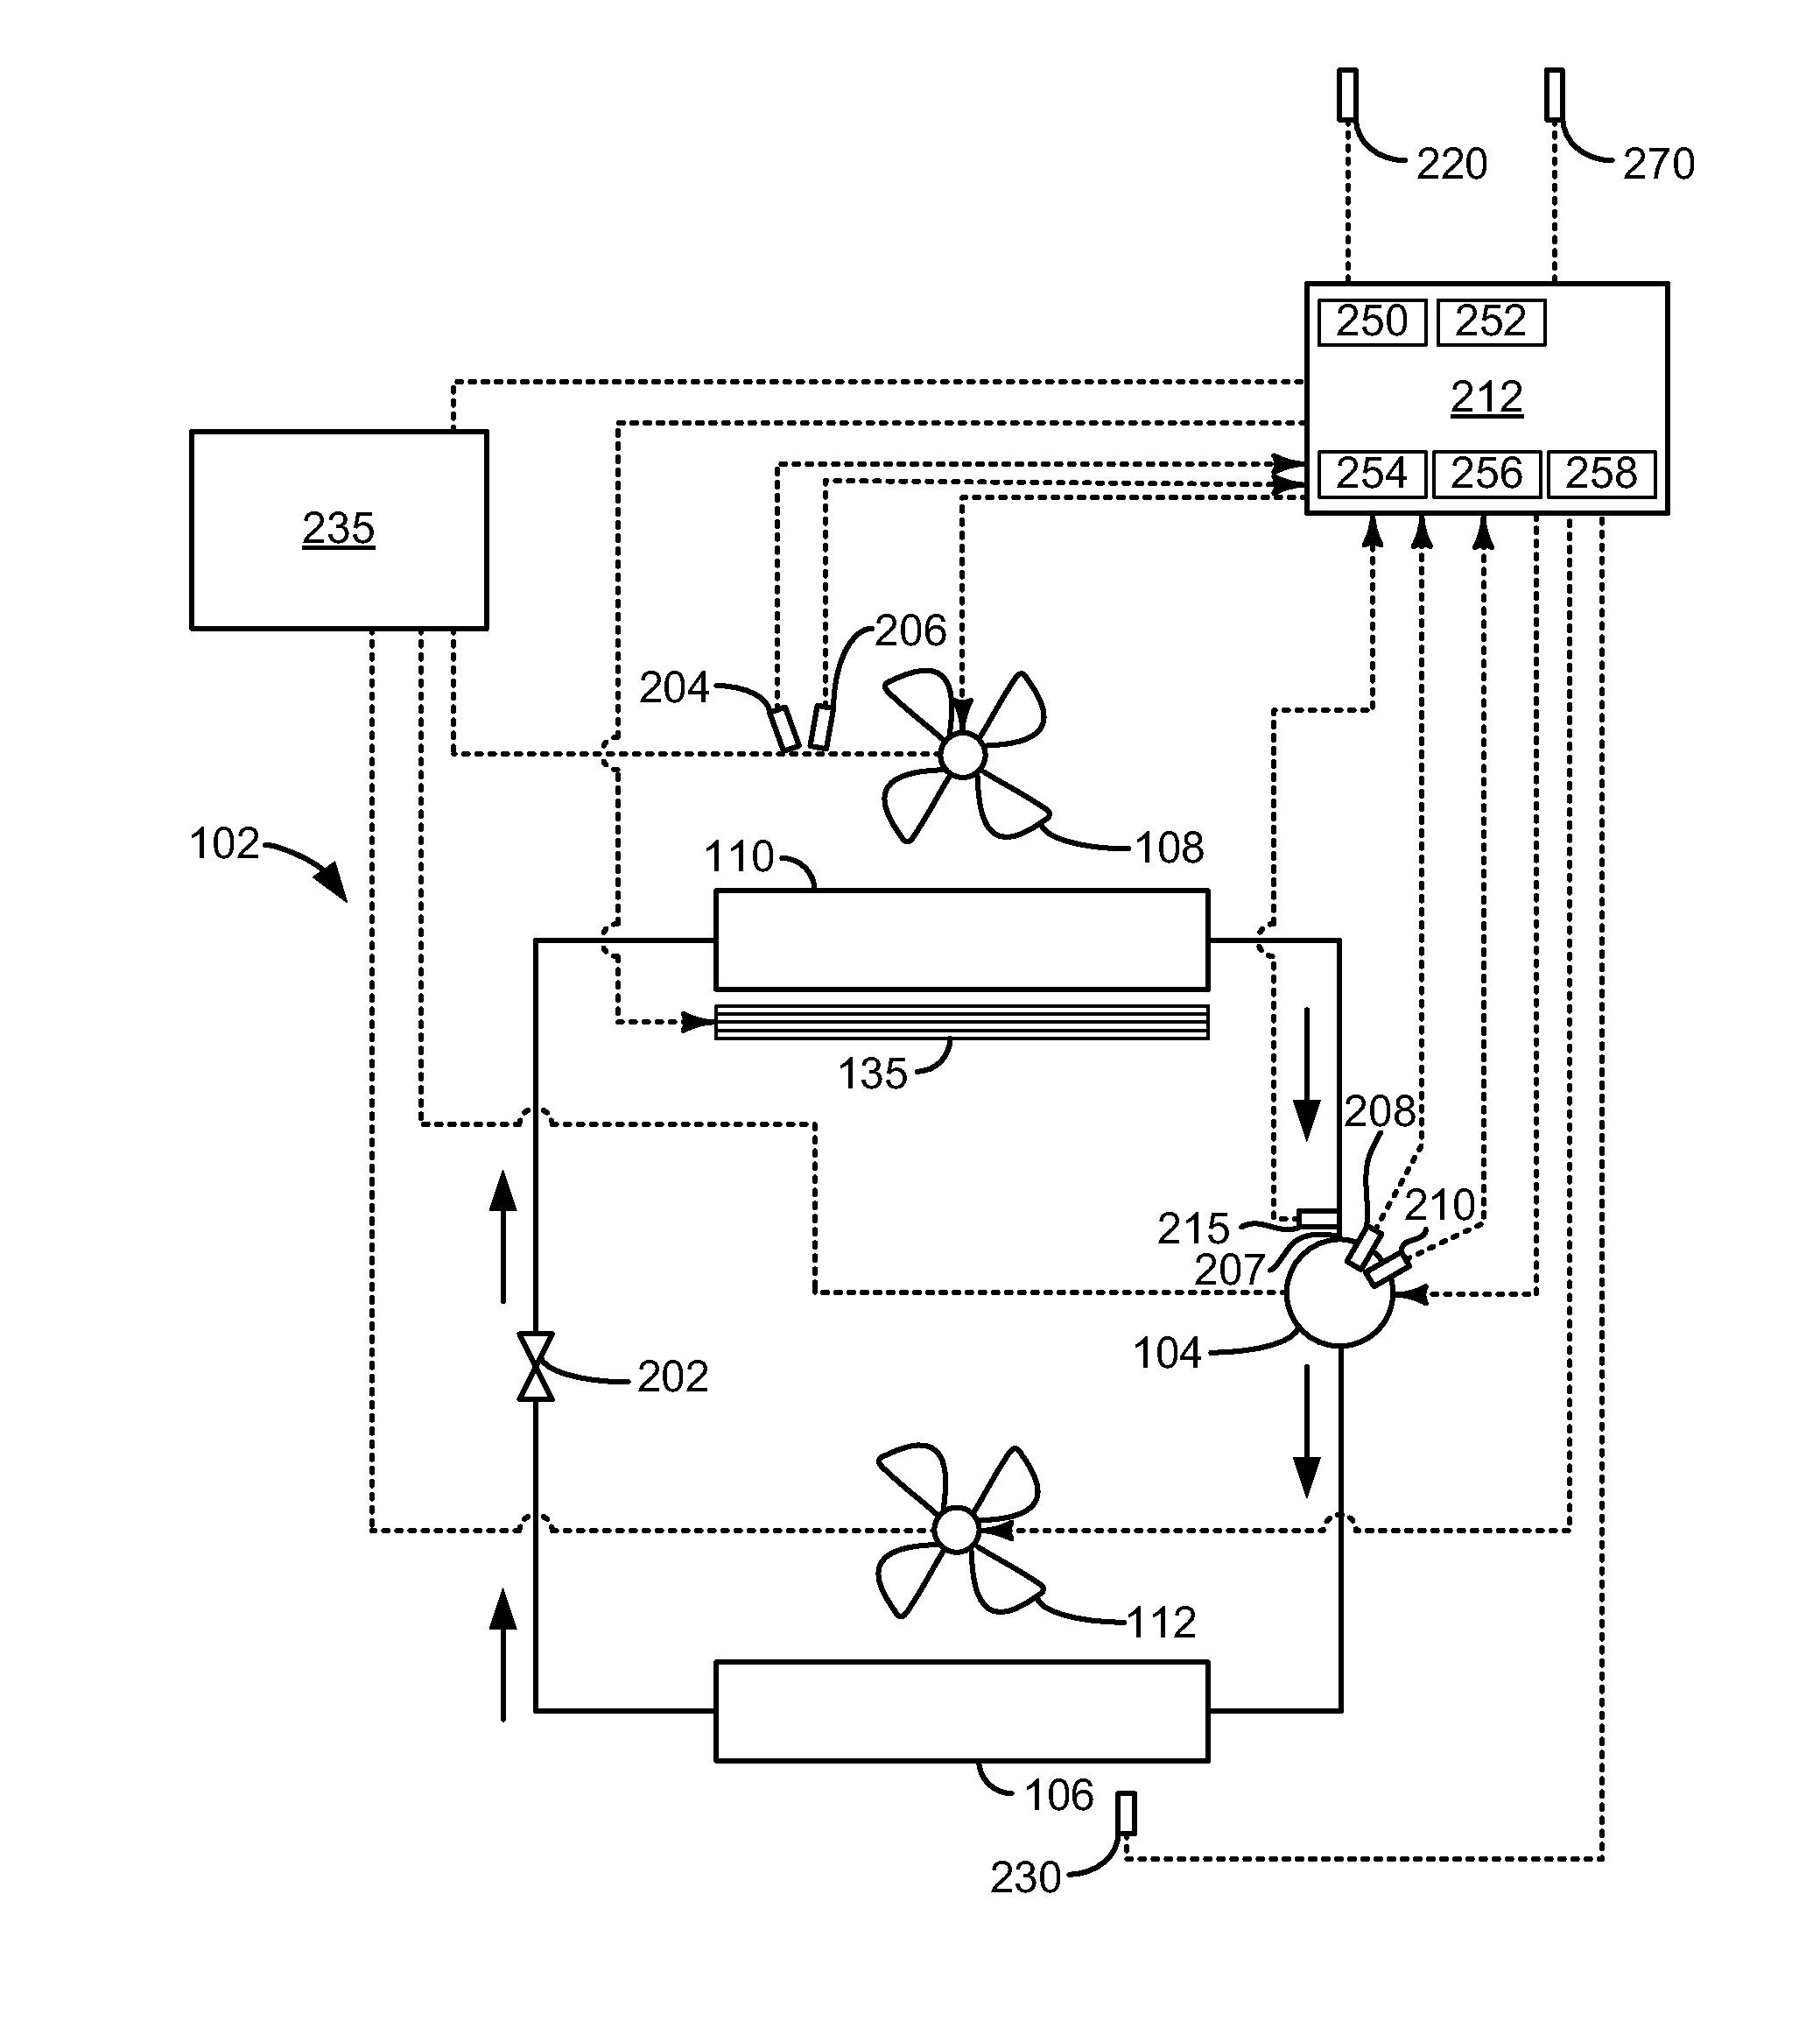 Method for adjusting fan and compressor power for a vehicle cabin heating system